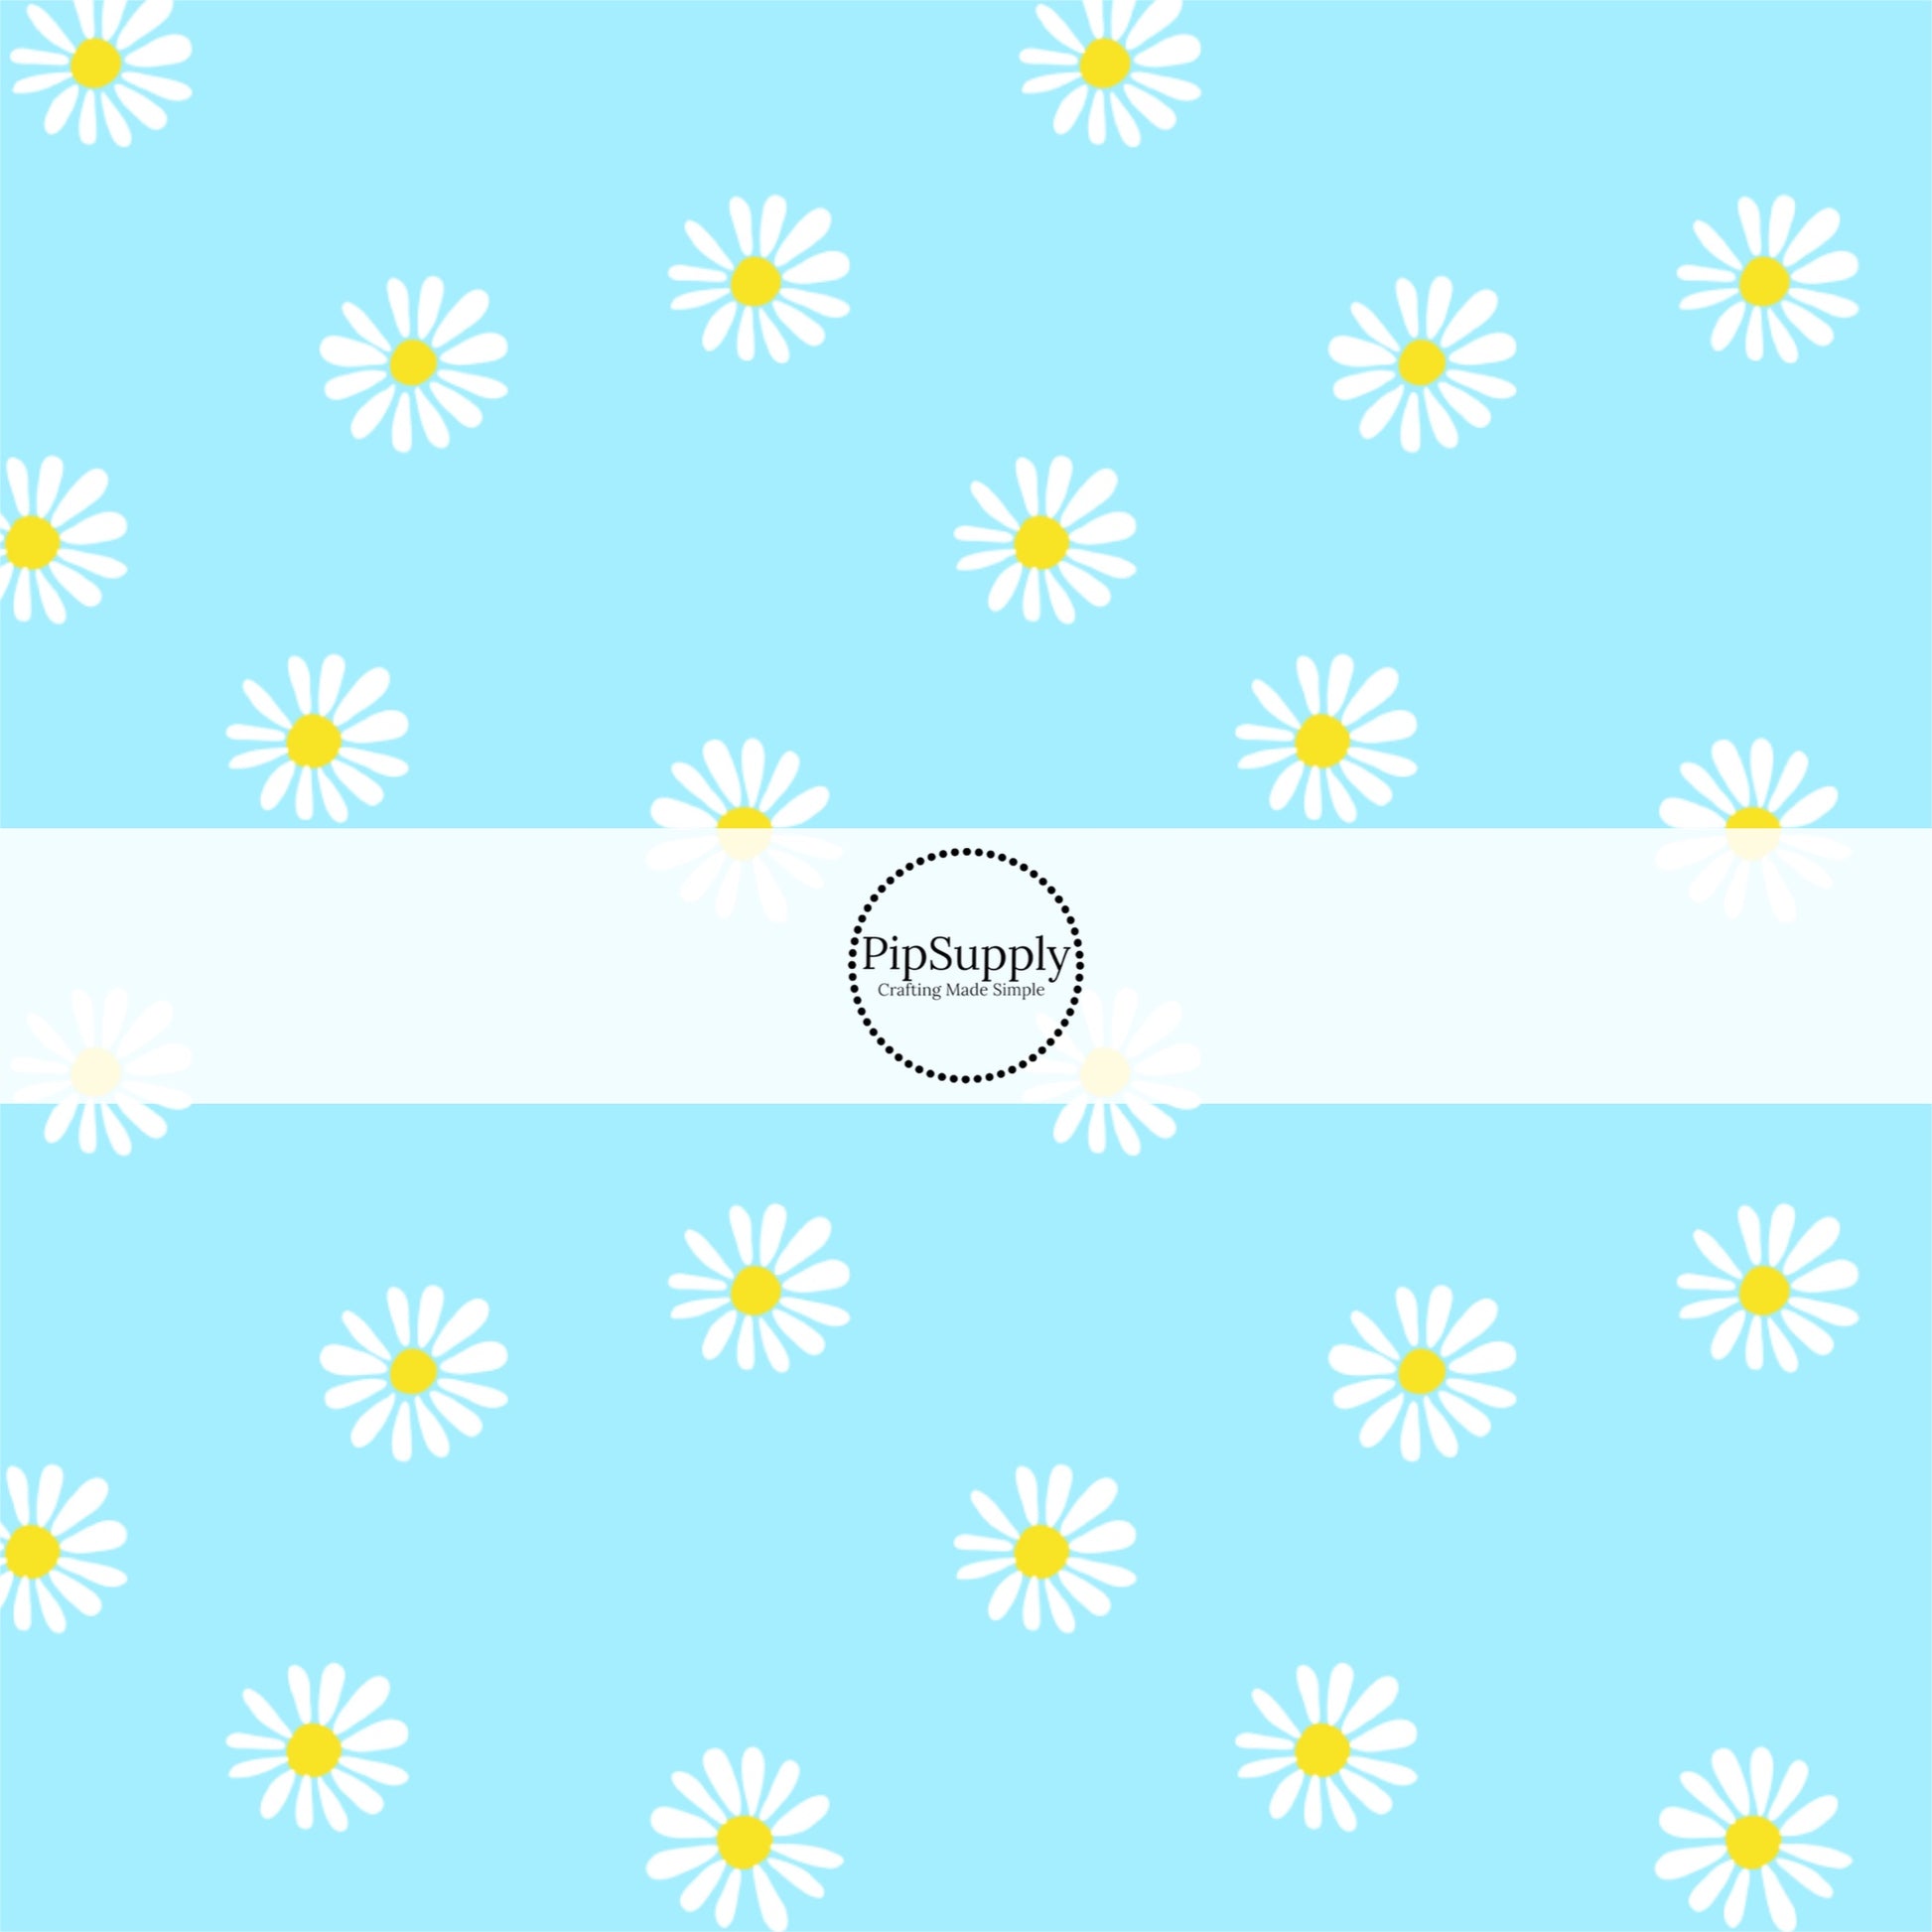 Sky Blue Fabric by the Yard with a White Daisies. Spring Fabric - Floral Easter Fabric.